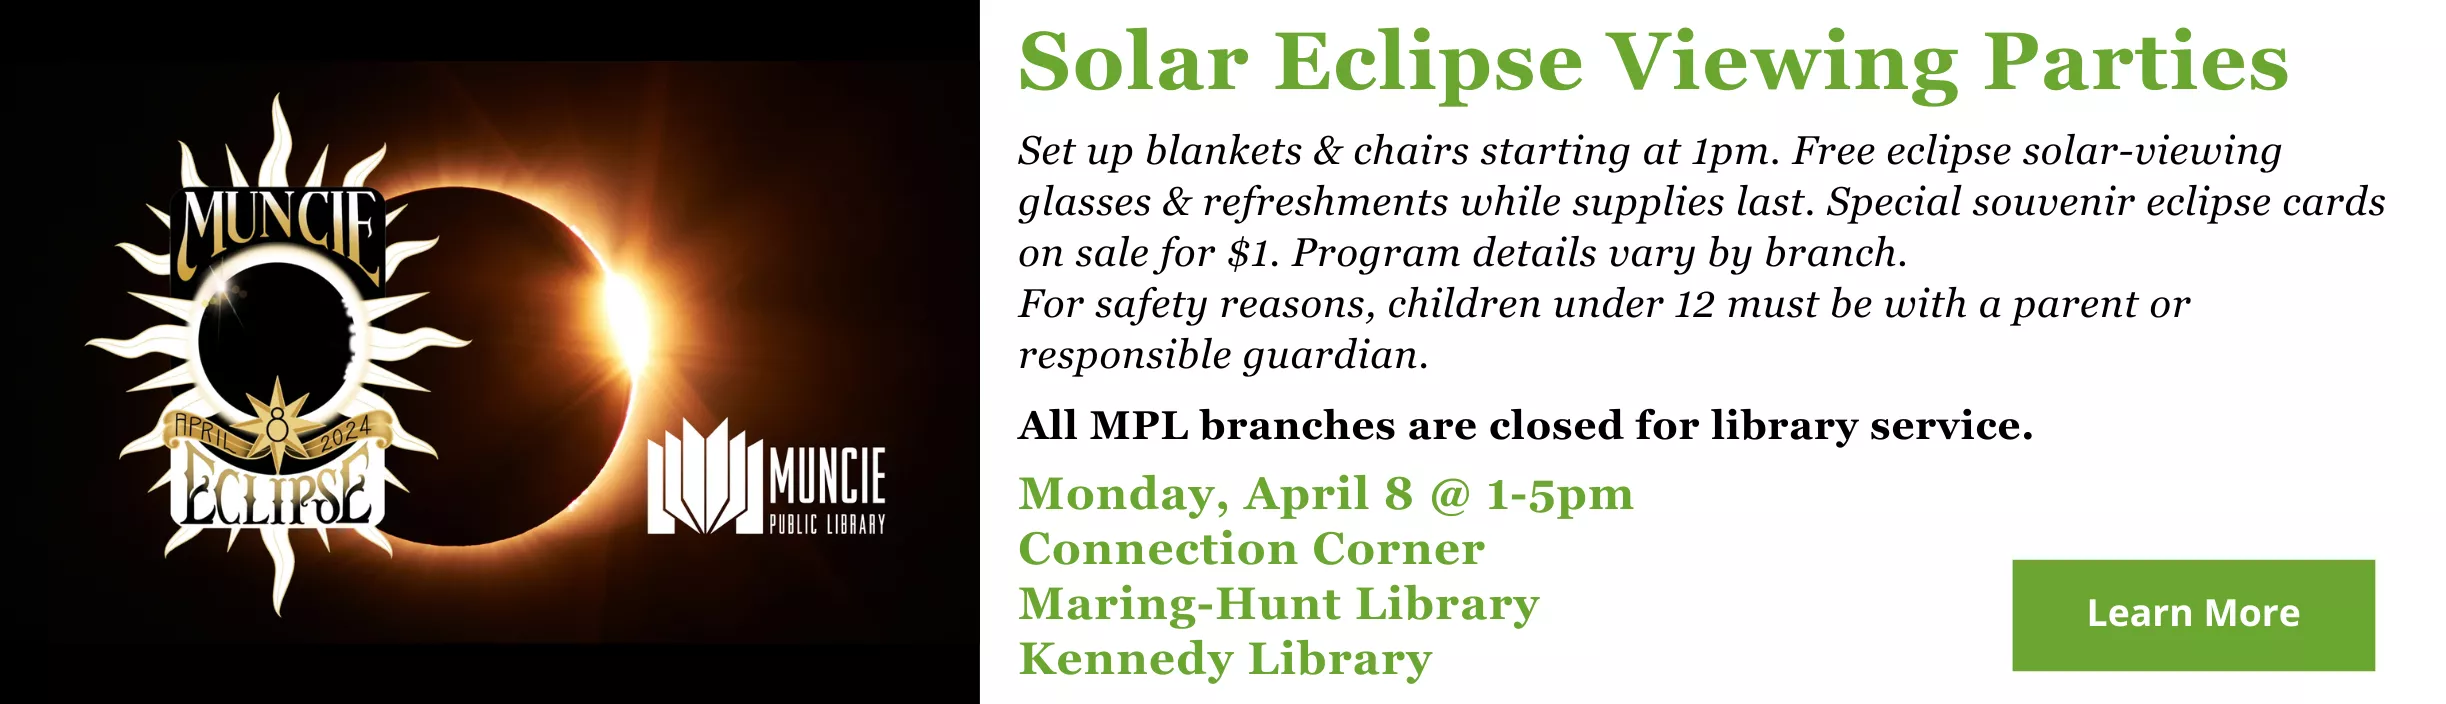 Eclipse Viewing Parties - Monday, April 8 1-5pm at Connection Corner, Kennedy Library, Maring-Hunt Library. Library closed for service. 